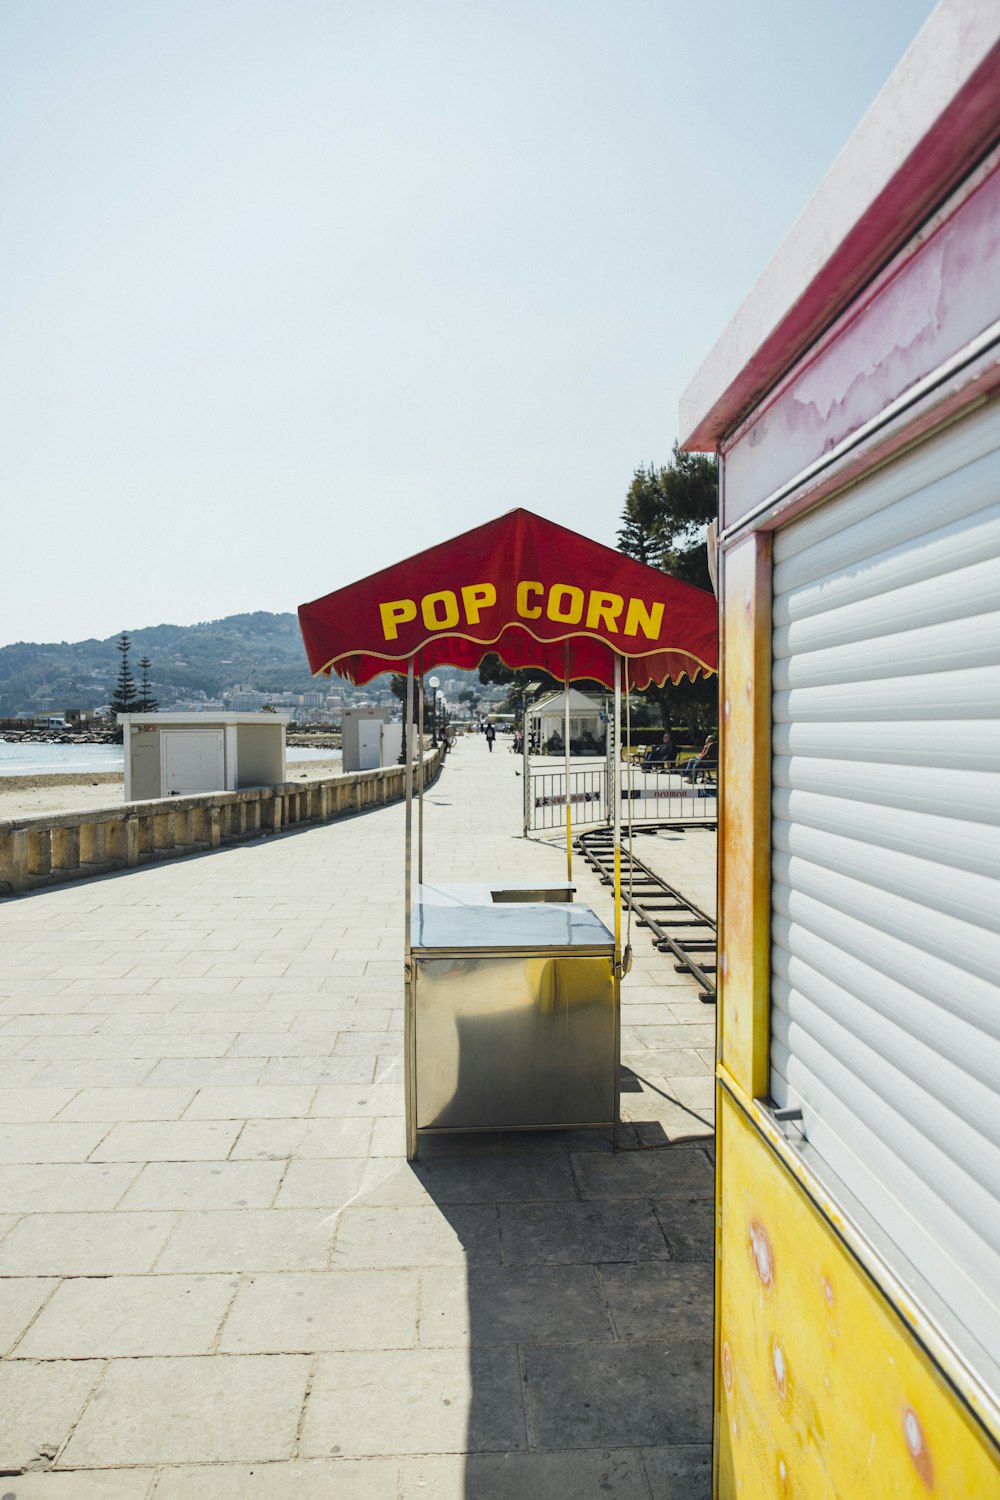 a pop corn stand on the side of a road